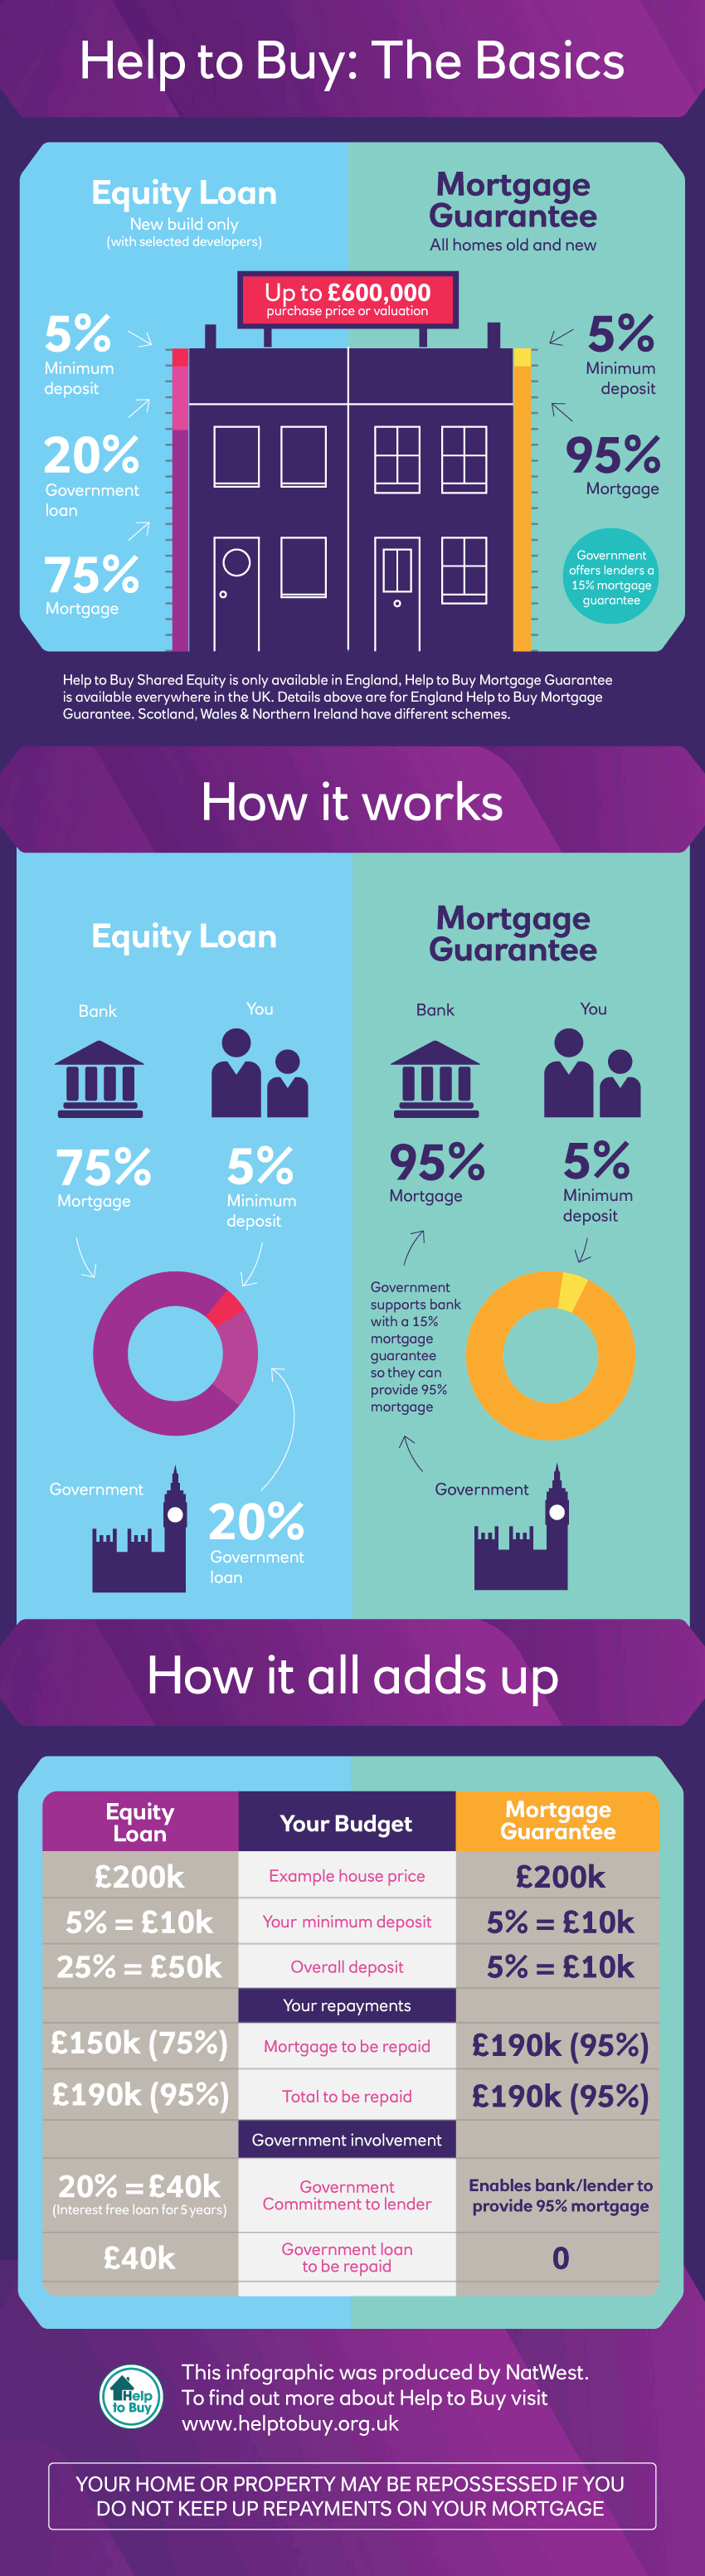 Help to Buy Explained by NatWest Infographic